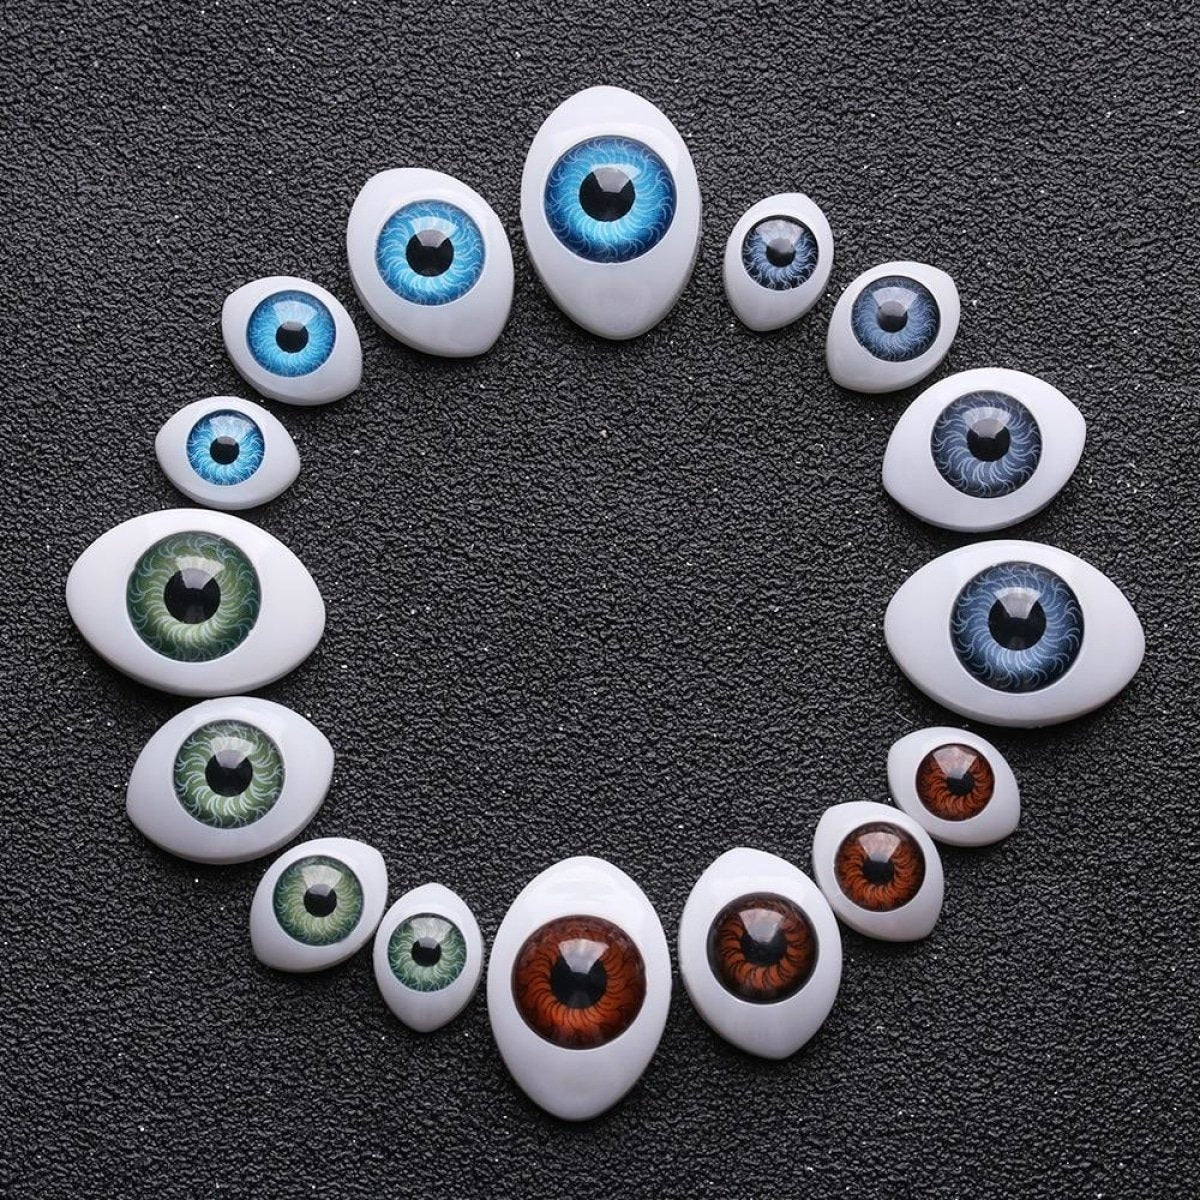 32/40pcs Oval Shaped Doll Eyes Plastic for DIY Toy Doll Animal Puppet Dinosaur Half Round - Brown - 10x13mm - Asia Sell